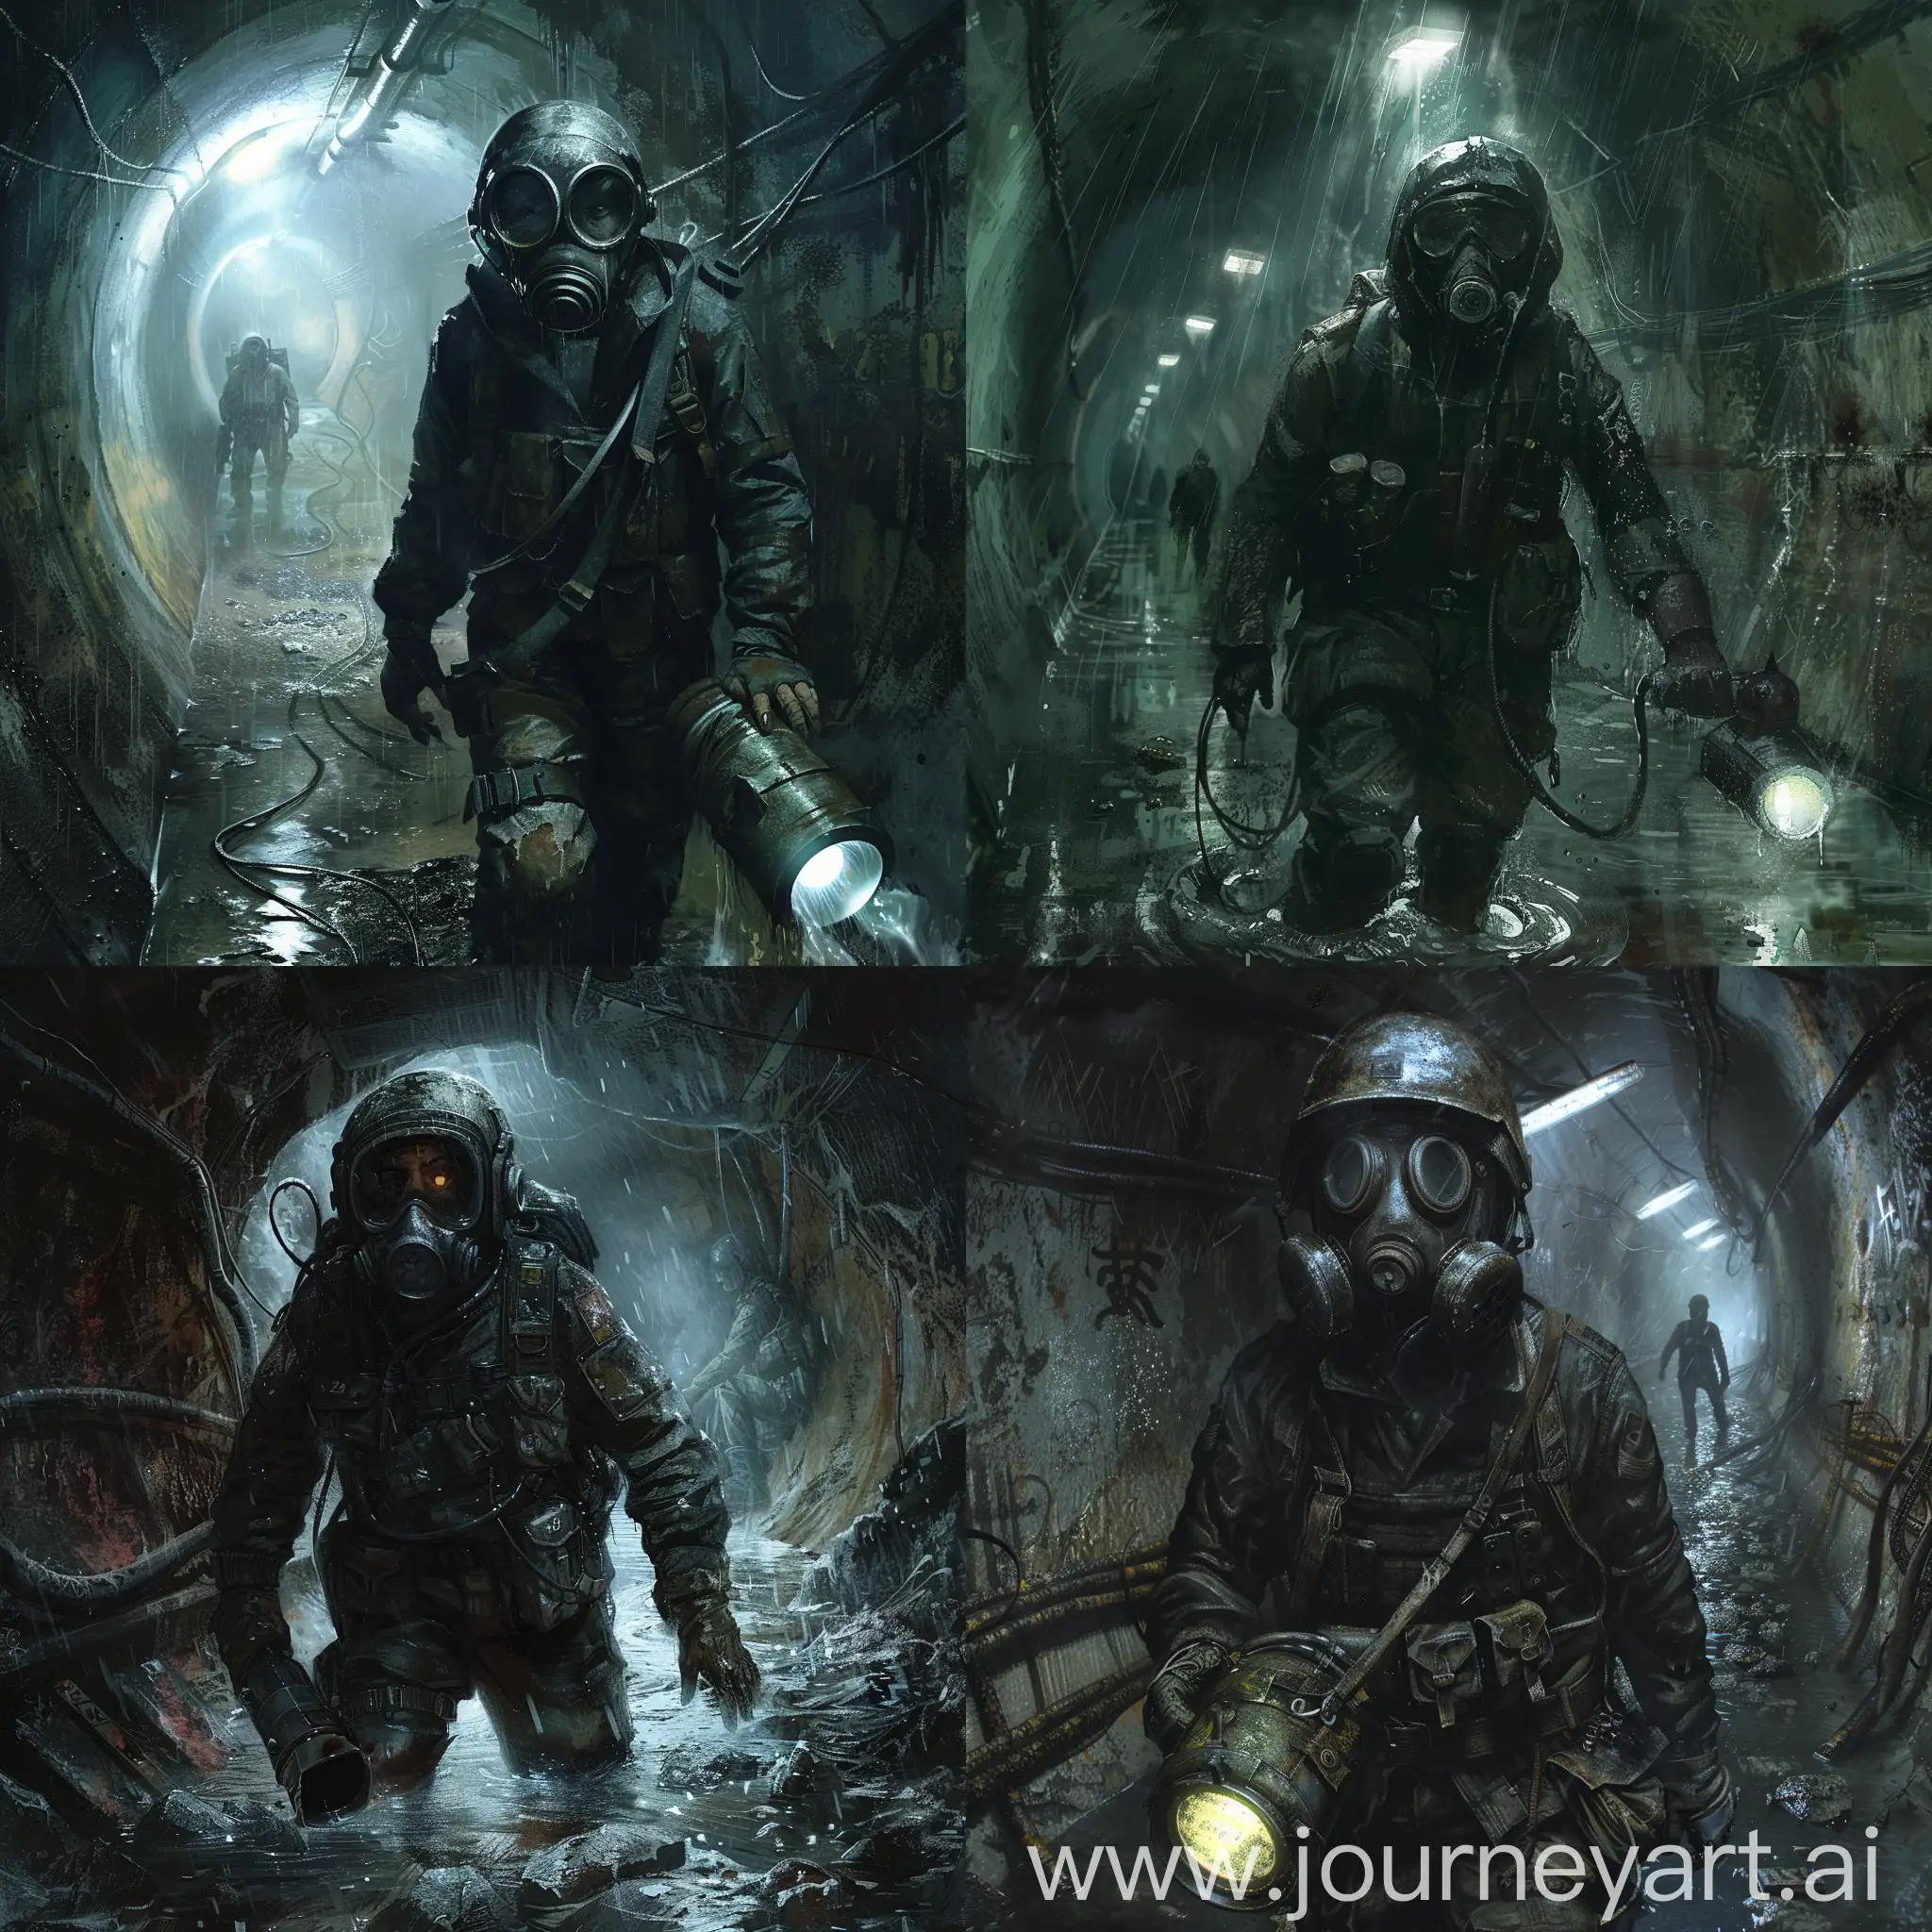 Metro 2033 art, a survivor in a Soviet tank helmet, in a gas mask, in overalls with a bulletproof vest, with a bandaged hand, in the stalker's hand a large searchlight flashlight similar to a box with a handle that the stalker is holding, in another gun, the survivor walks through the flooded catacombs of the radioactive subway, no light sources, complete darkness behind Gloomy catacomb walls in slime and pus.